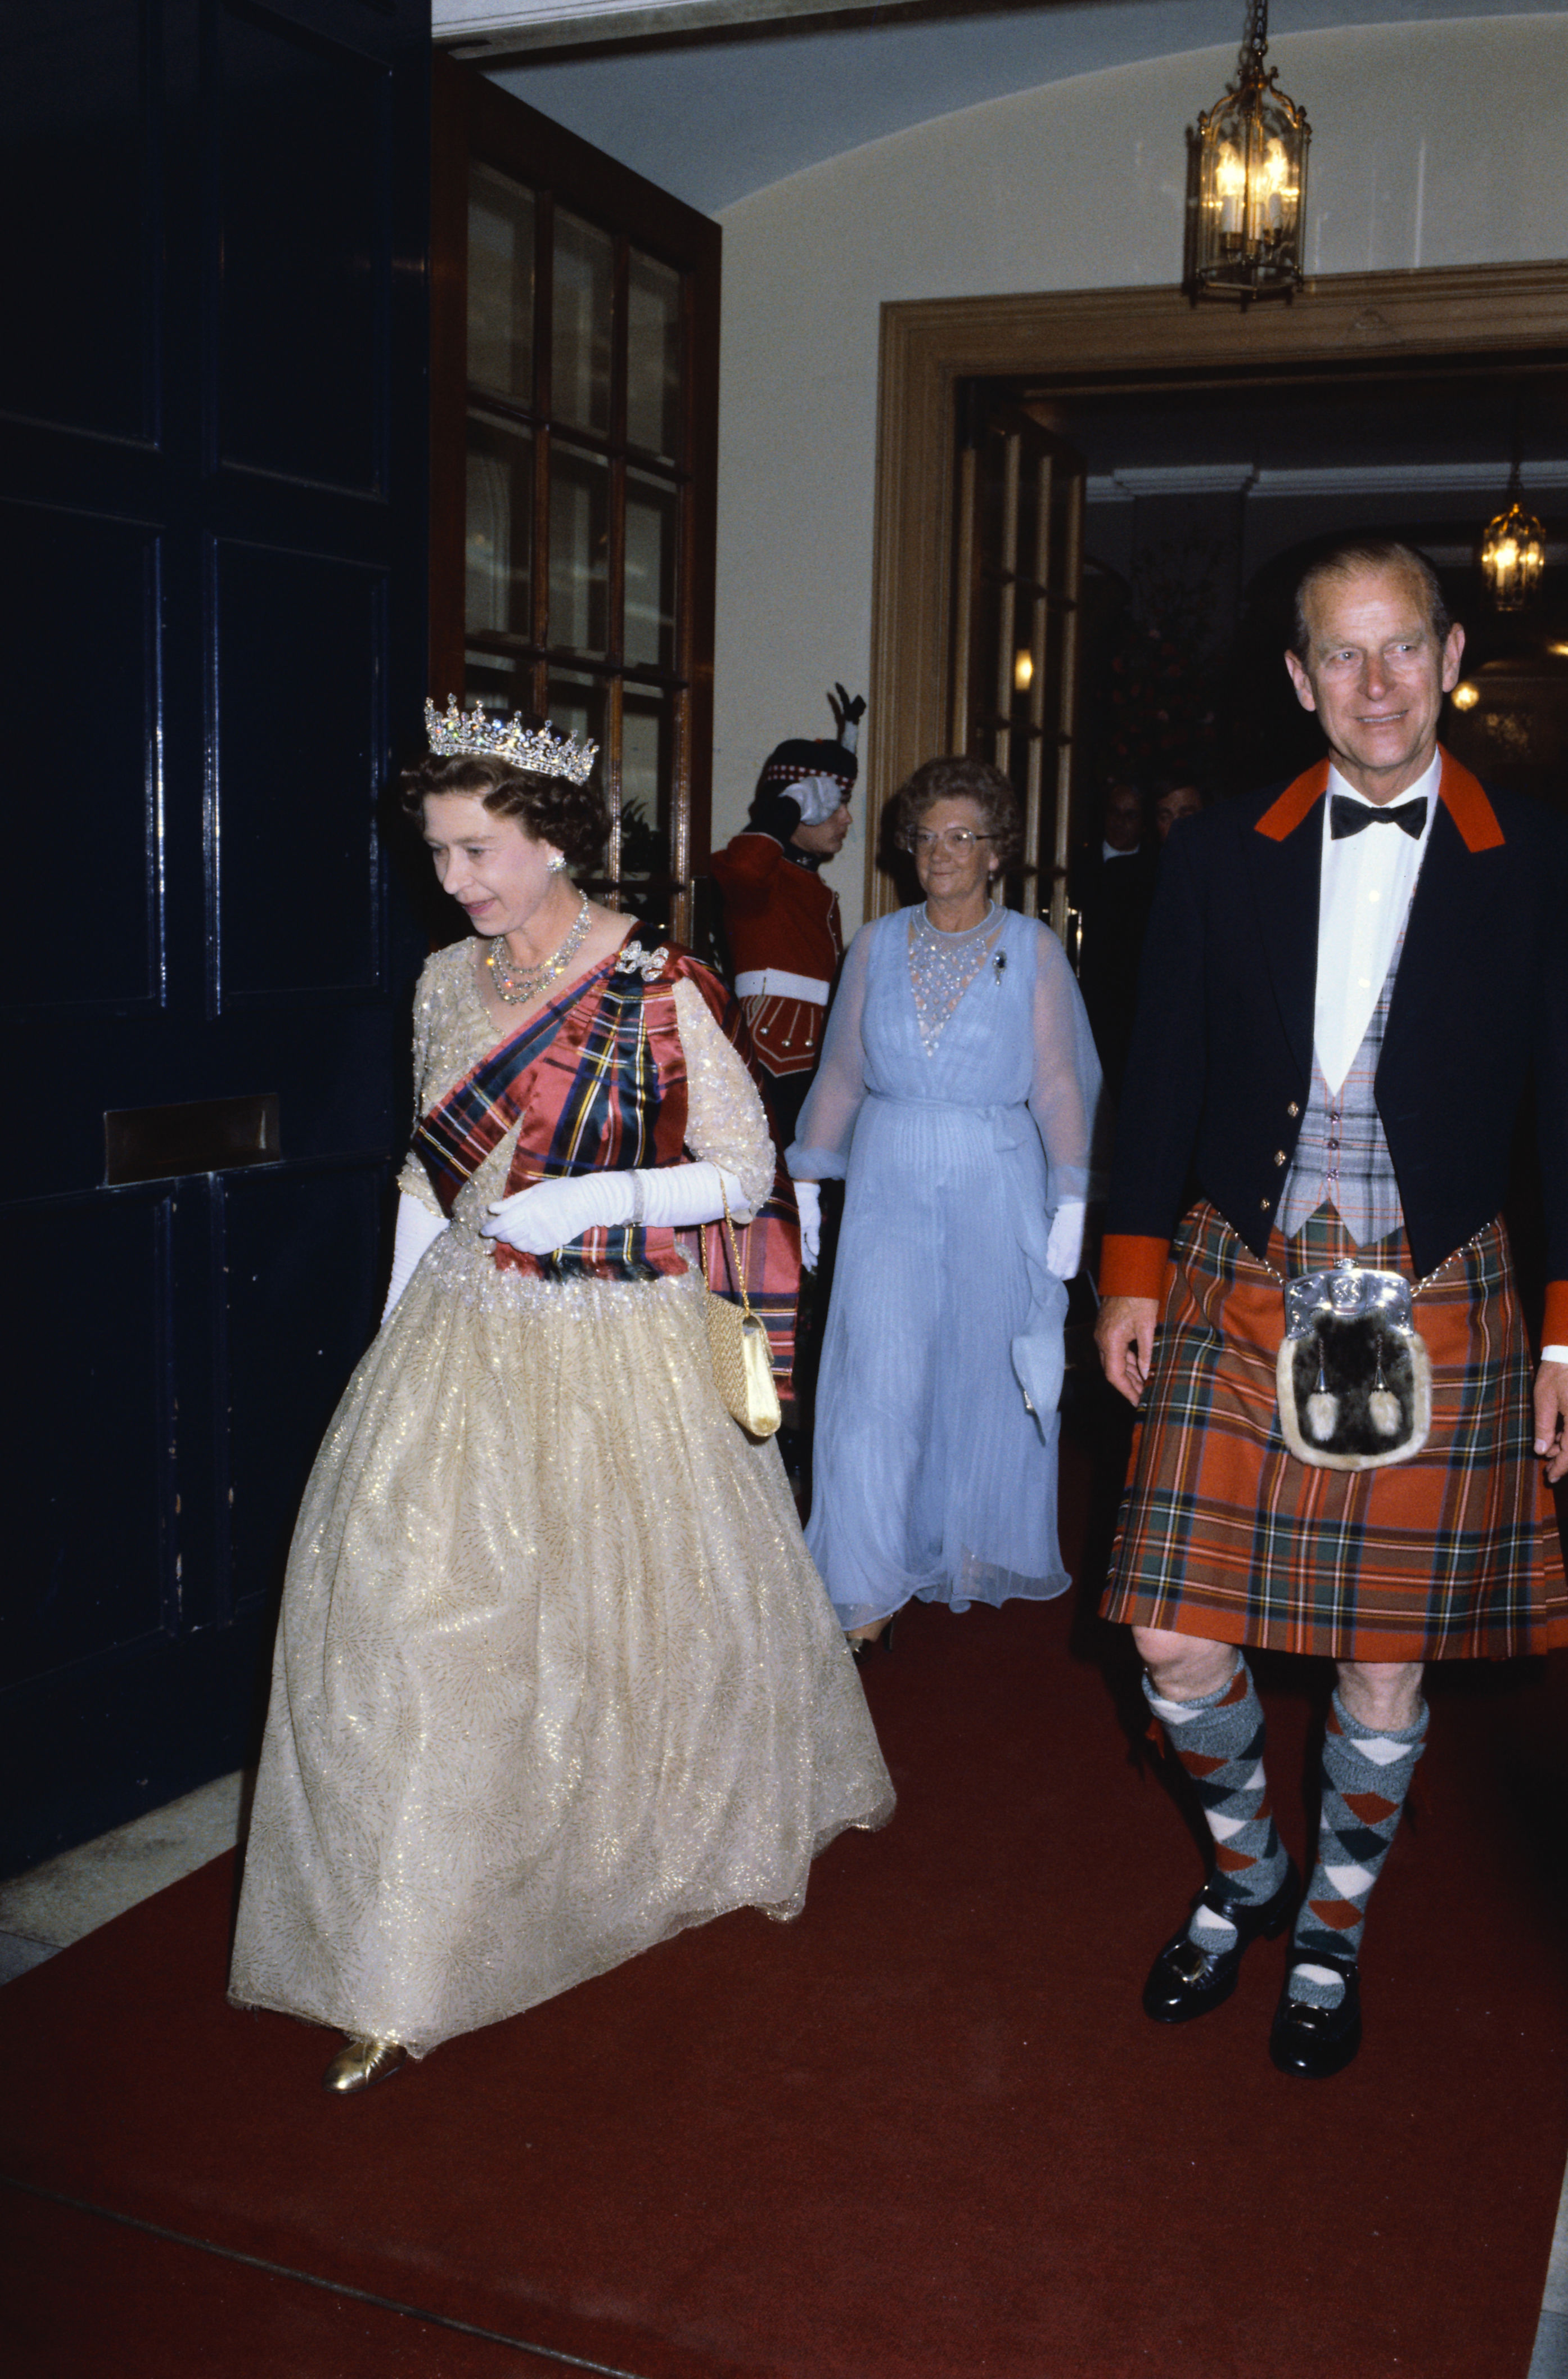 <p>More plaid! Clad in traditional tartan -- a sash for her, a kilt for him -- Queen Elizabeth II and Prince Philip arrived at the Royal Scottish Piper's Society Ball in the Assembly Rooms in Edinburgh, Scotland, on July 2, 1982.</p>